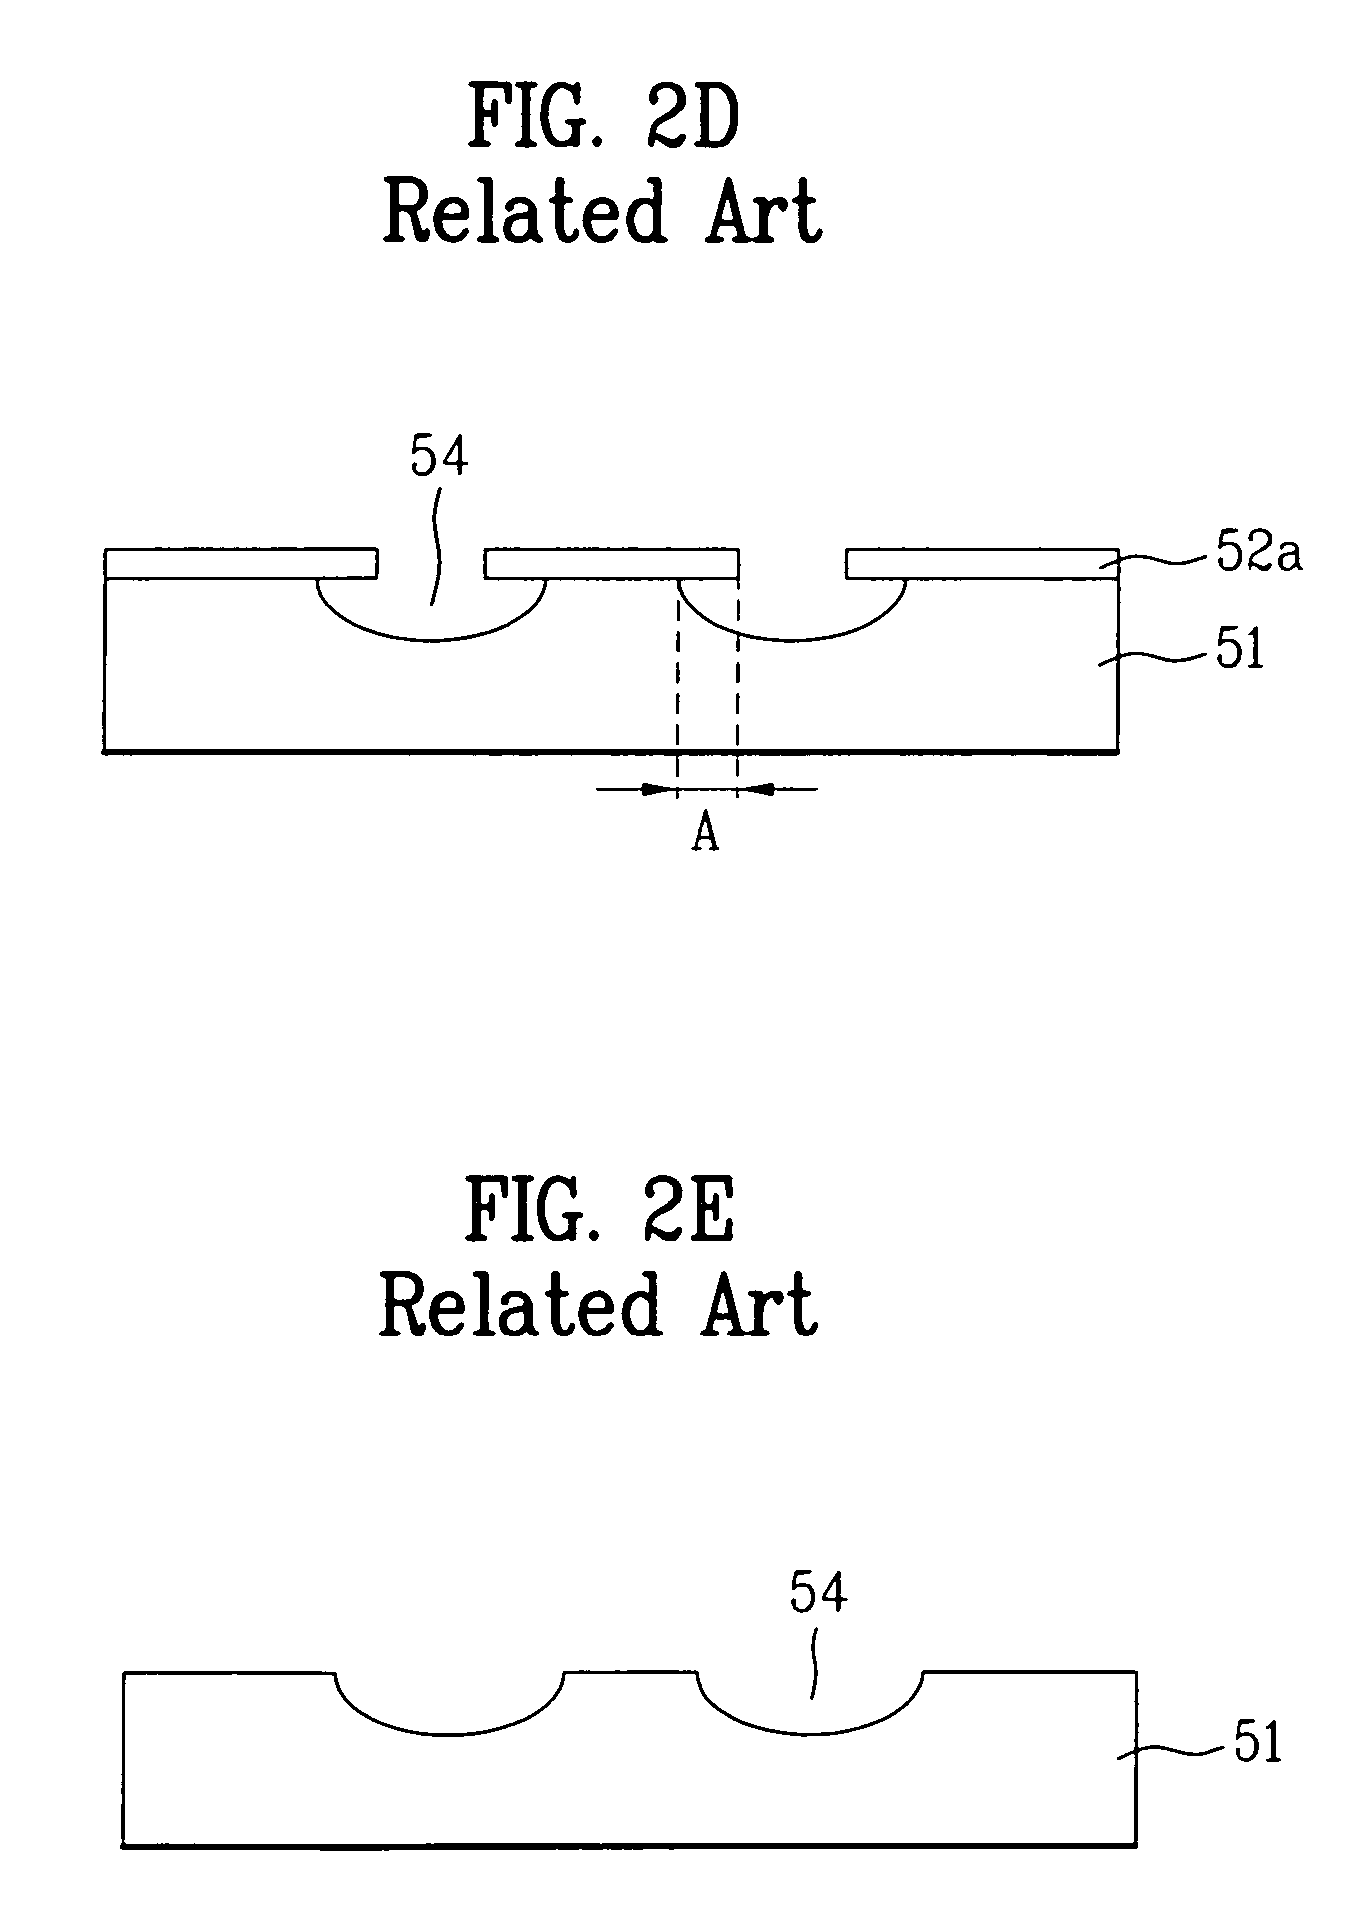 Method for manufacturing printing plate